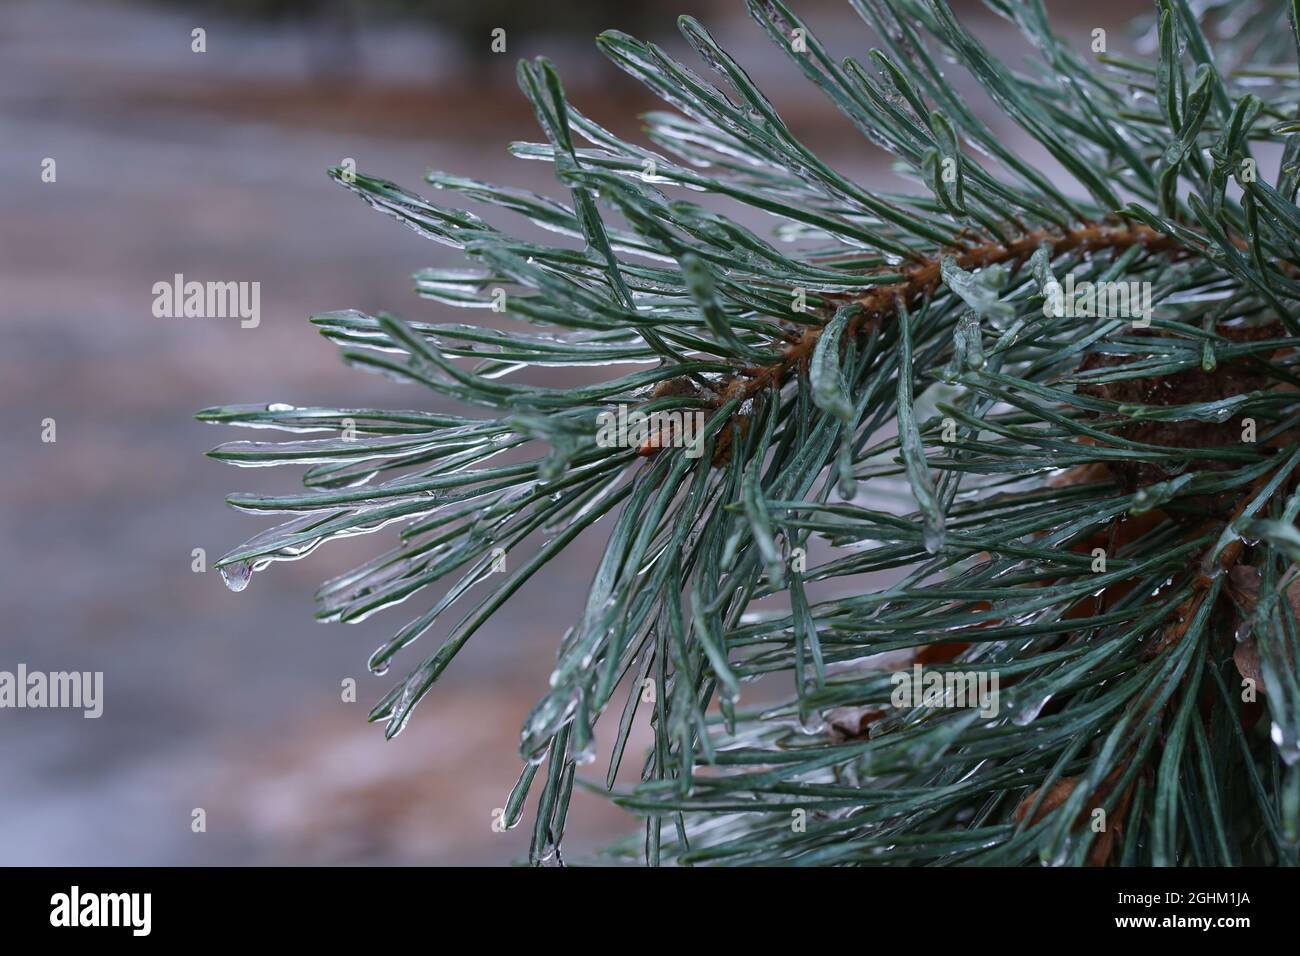 Pine tree branch covered ice and snow after an icy rain. Nature concept. Selective focus on a middle part of photo. Bokeh effect. Stock Photo